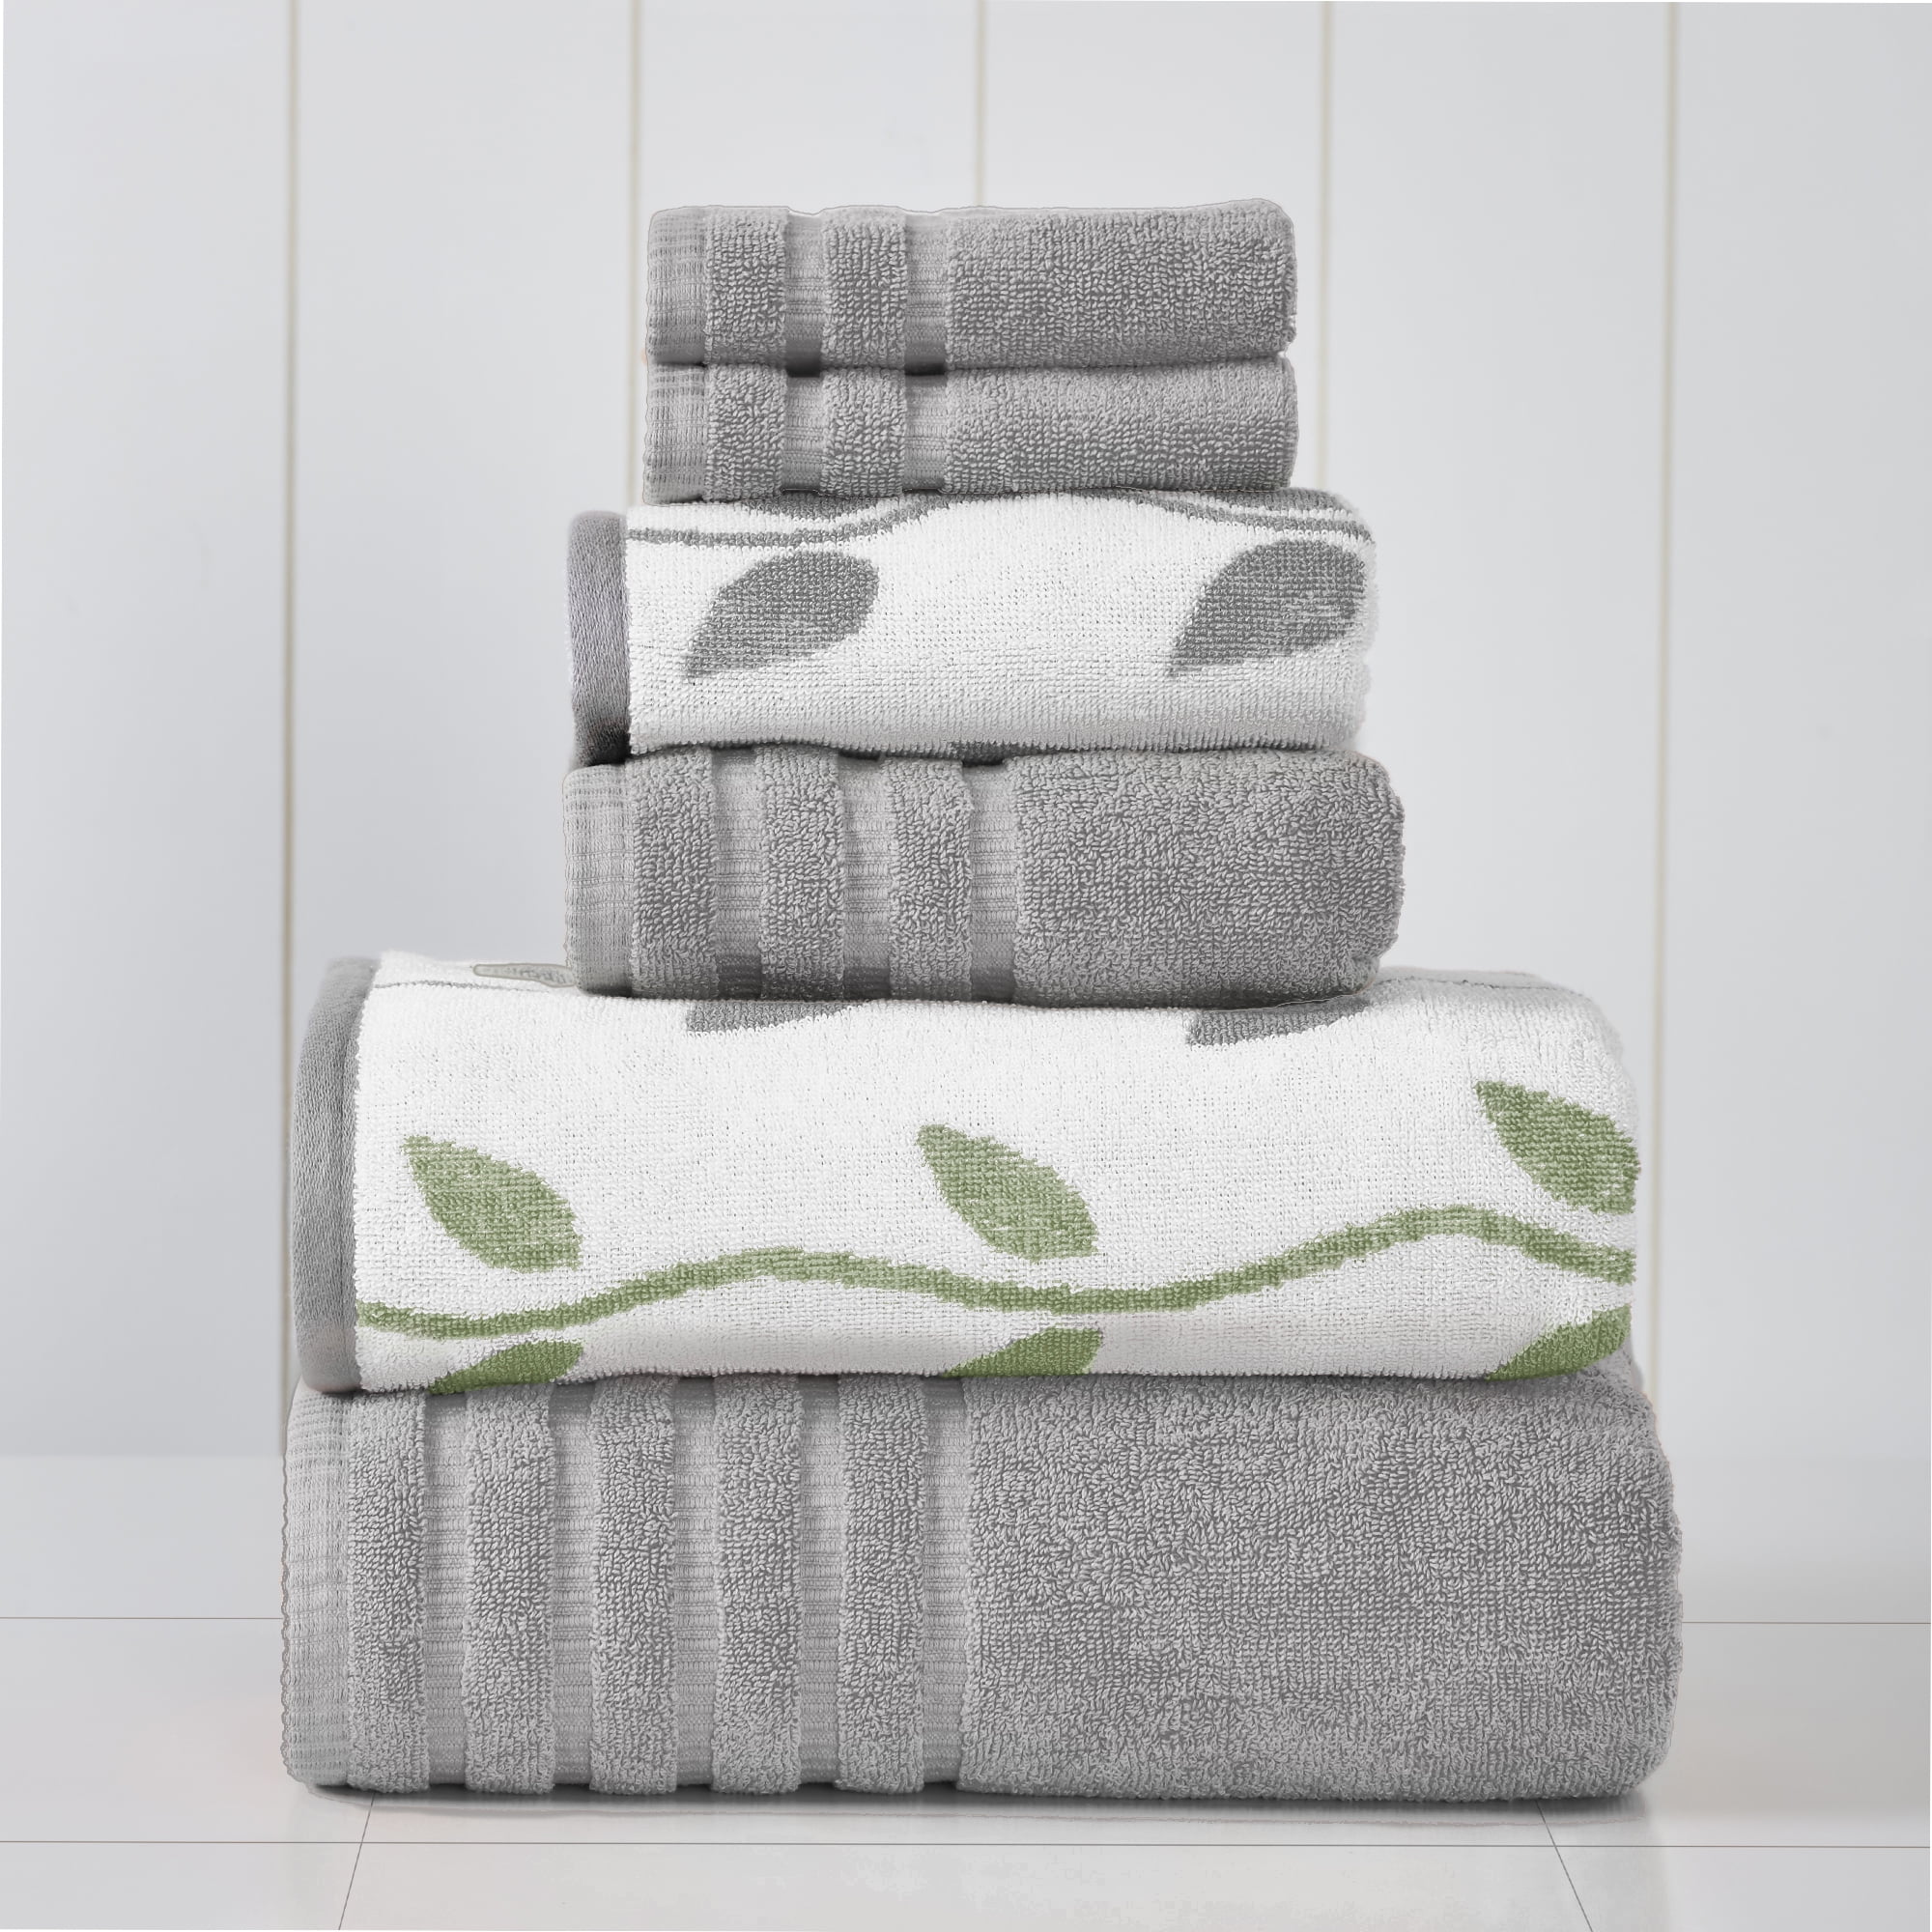 Set of Two 100% Organic Green Cotton Dish Towels